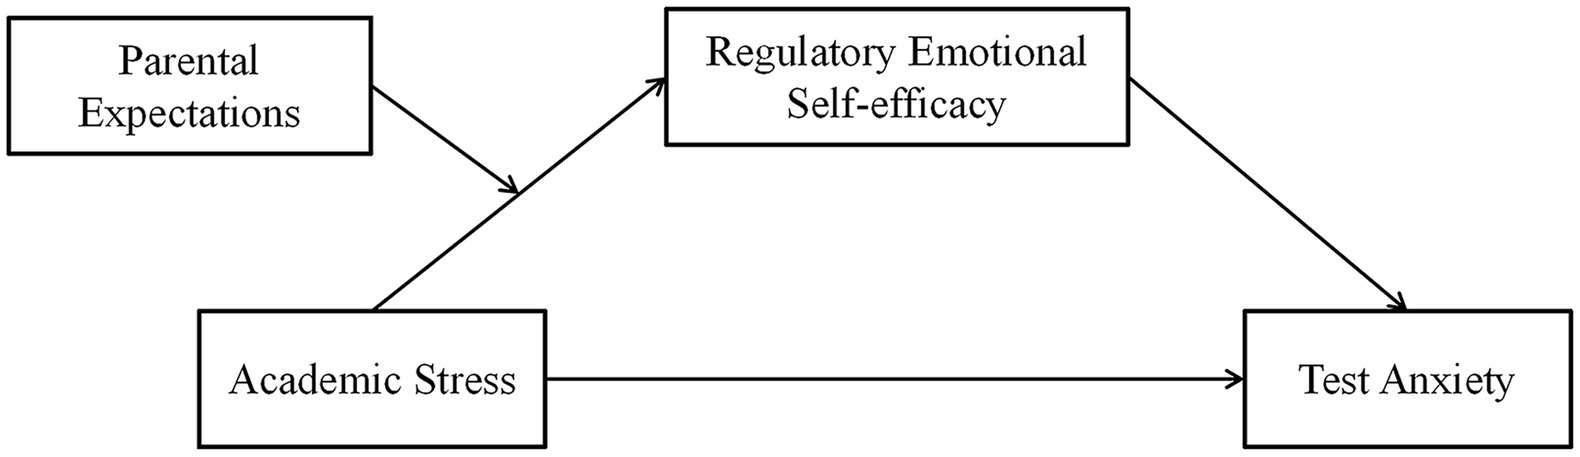 Frontiers  The association between academic stress and test anxiety in college  students: The mediating role of regulatory emotional self-efficacy and the  moderating role of parental expectations